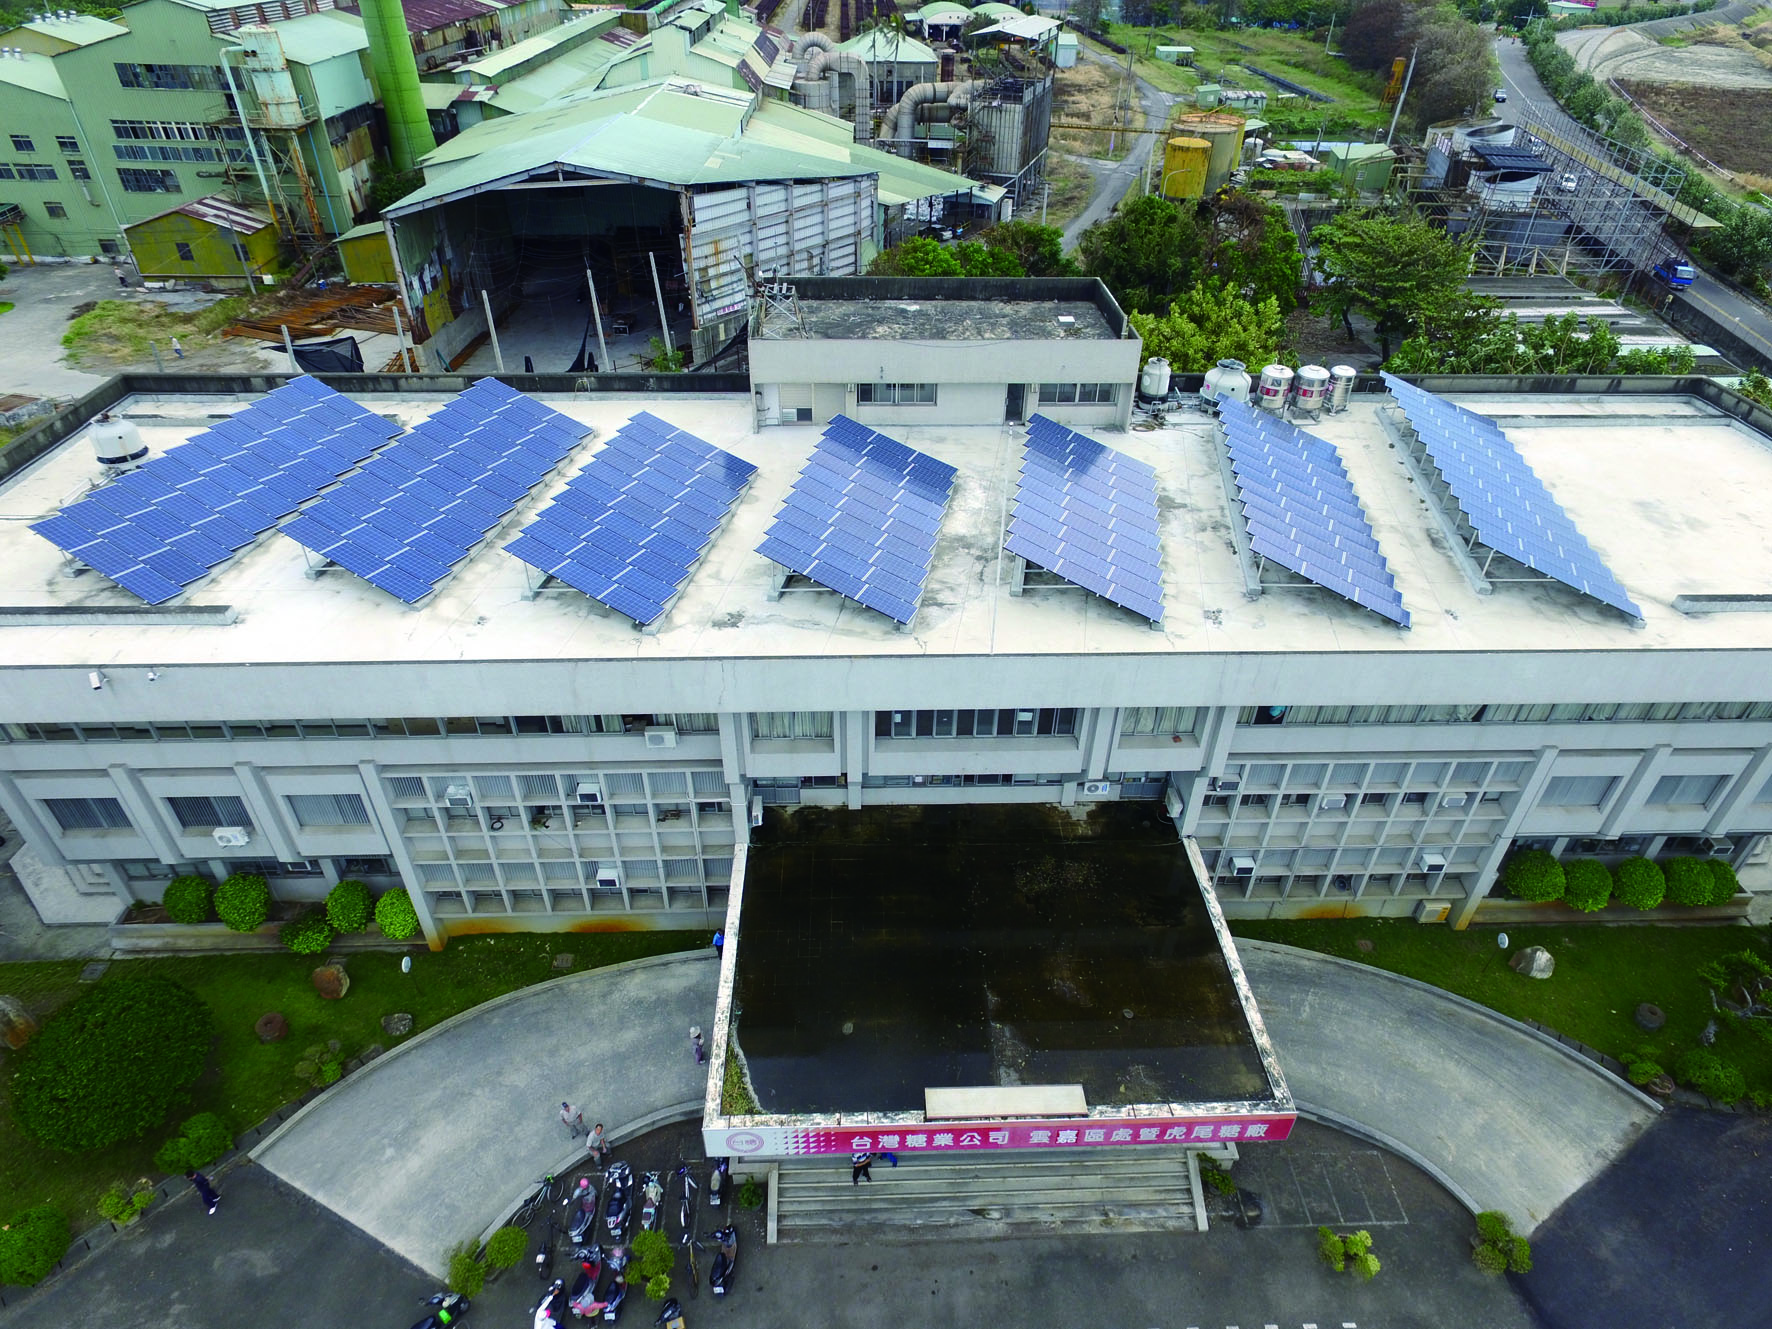 Solar panels on top of the office building in Huwei Sugar Factory.